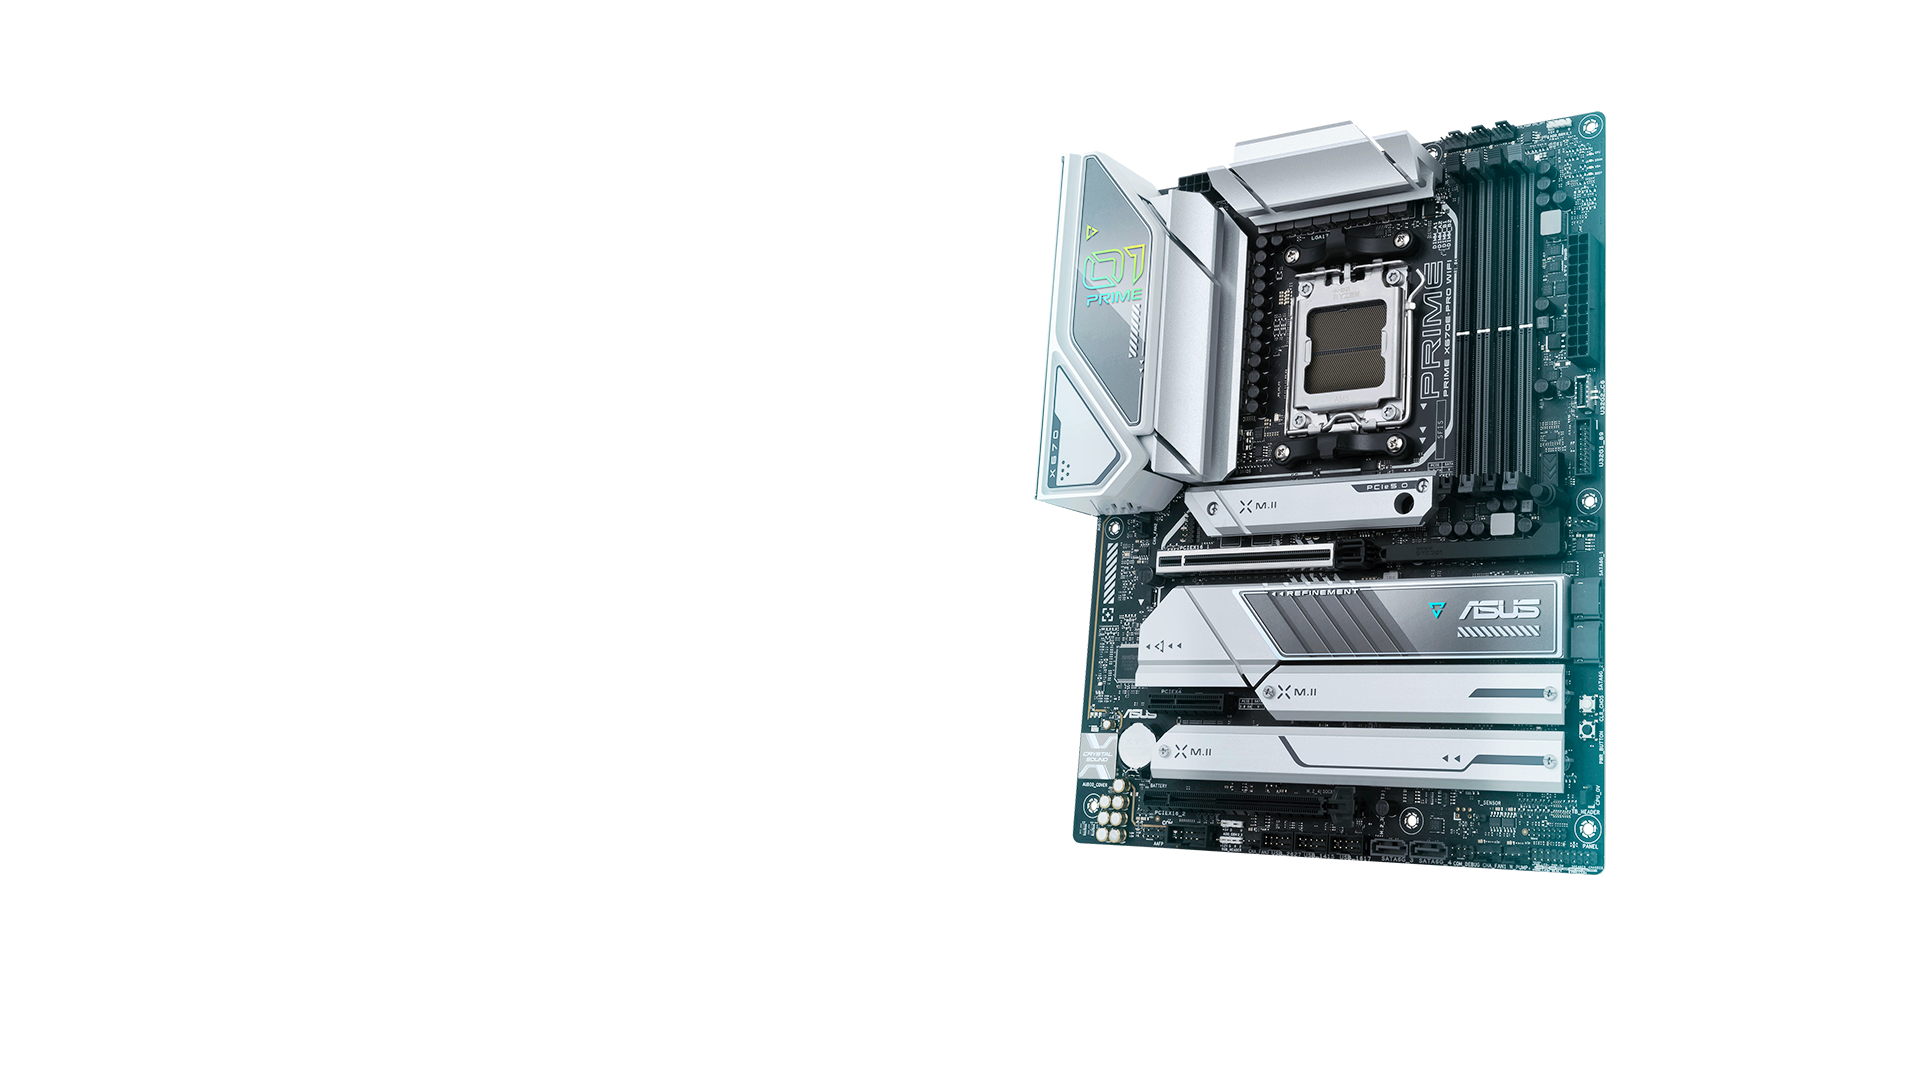 PRIME X670E-PRO WIFI provides users and PC DIY builders a range of performance tuning options via intuitive software and firmware features.